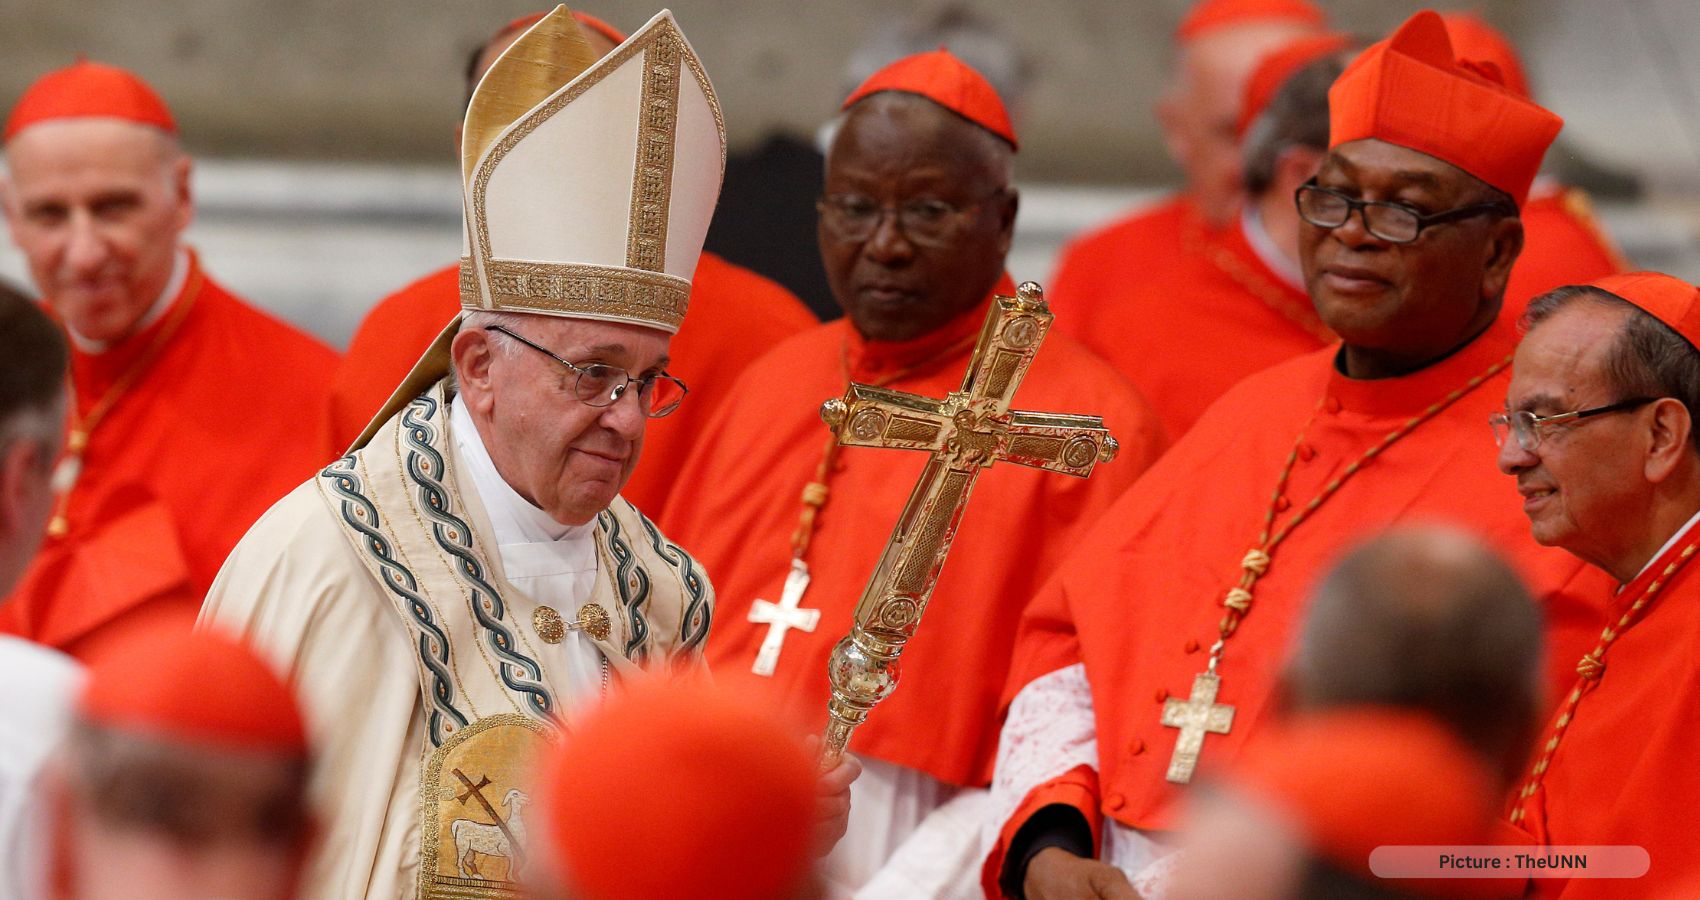 Under Pope Francis, the College of Cardinals has become less European